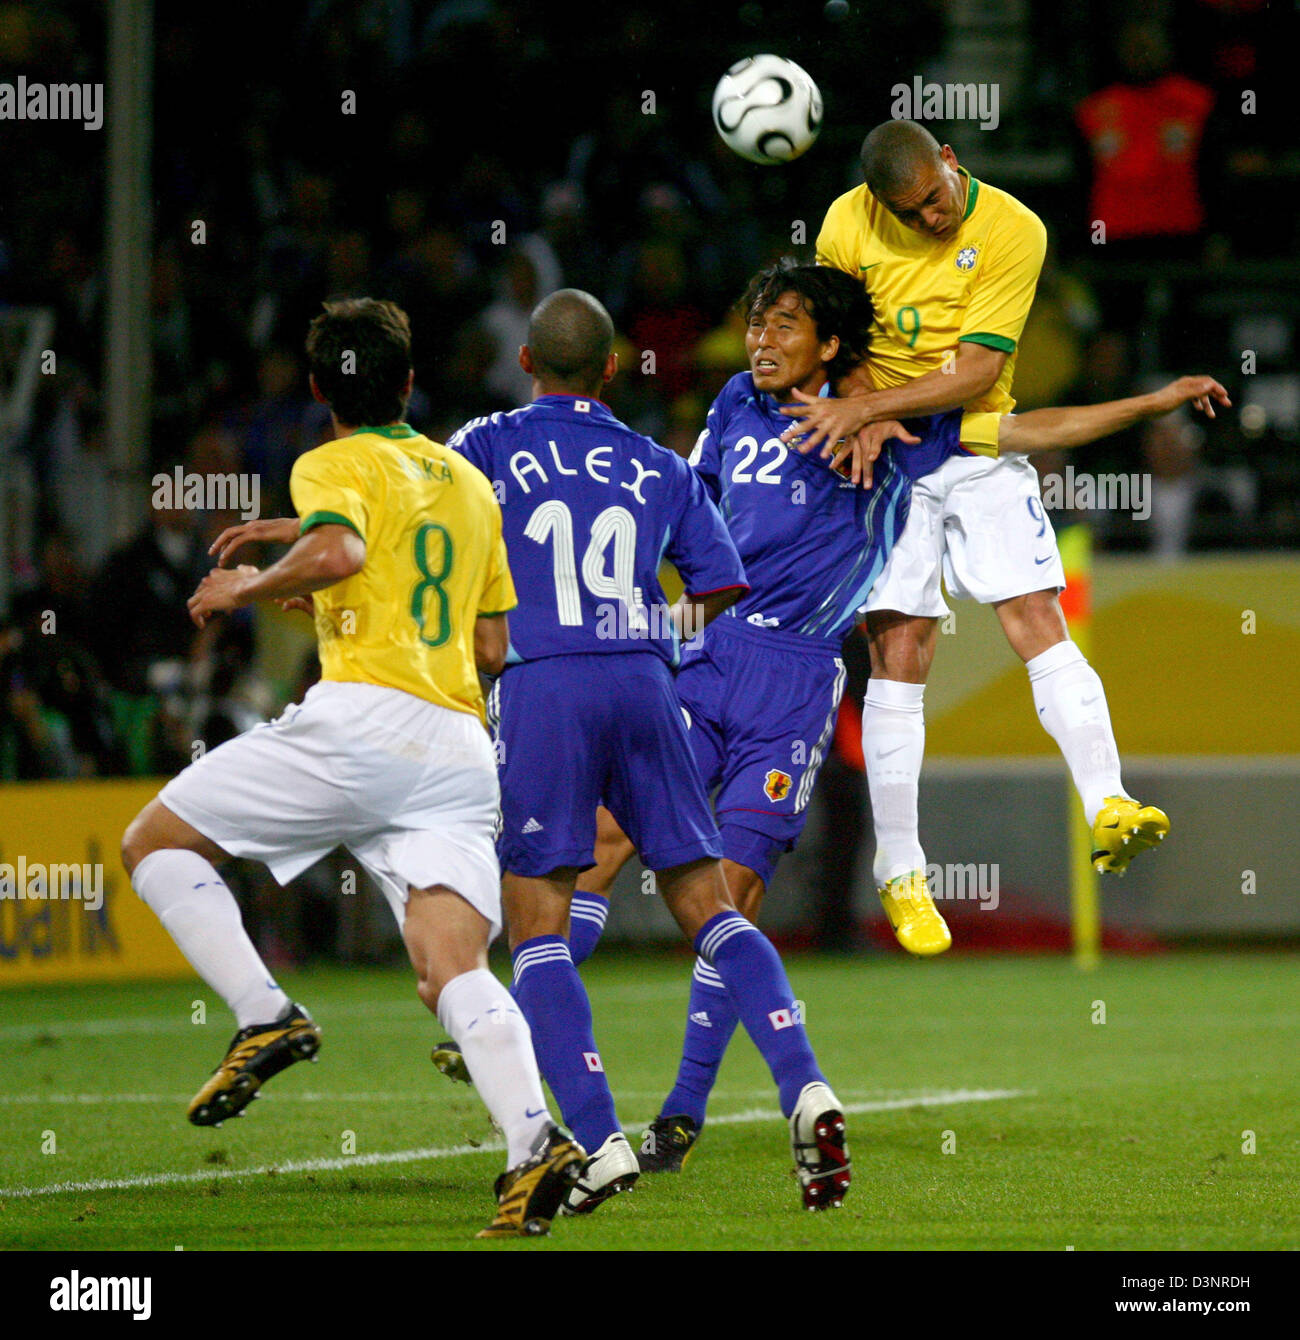 Ronaldo (R) from Brazil vies for the ball with his teammate Kaka (L) and Japanese Alessandro Santos (2.L) and Yuji Nakazawa (2.R) during the group F match of 2006 FIFA World Cup between Japan and Brazil in Dortmund, Germany, Thursday 22 June 2006.  DPA/FELIX HEYDER +++ Mobile Services OUT +++ Please refer to FIFA's Terms and Conditions. Stock Photo